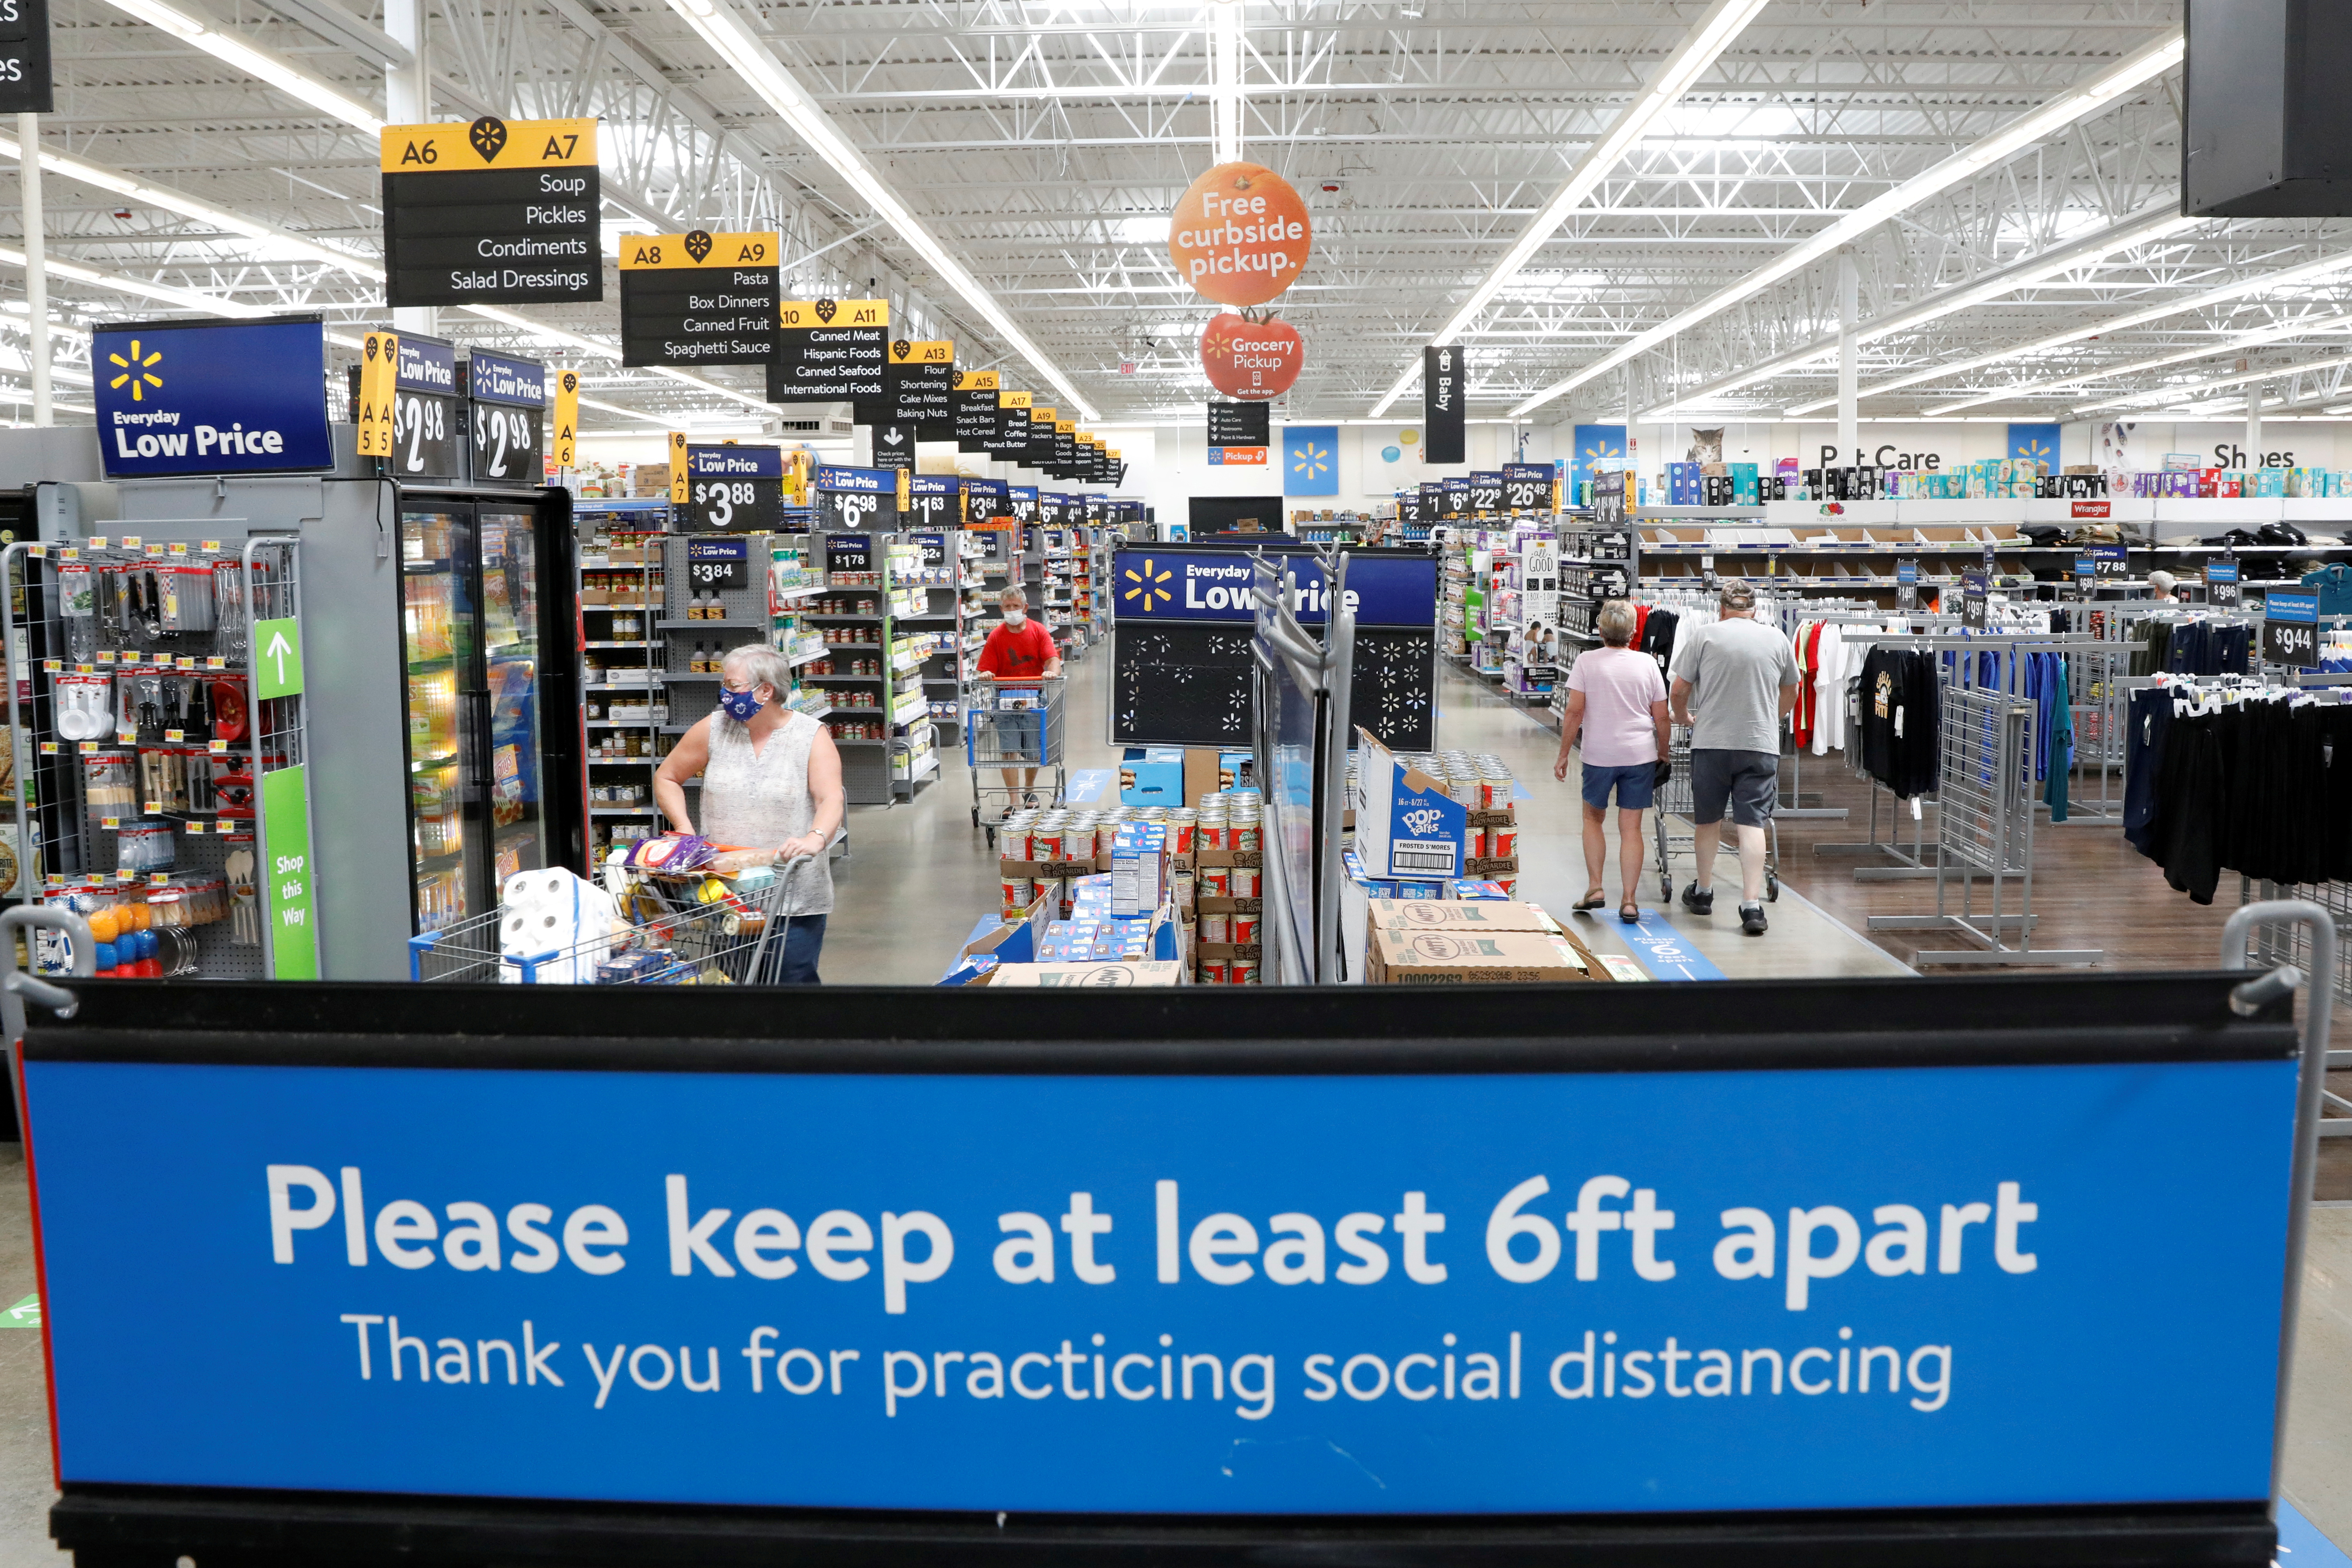 Shoppers are seen wearing masks while shopping at a Walmart store in Bradford, Pennsylvania